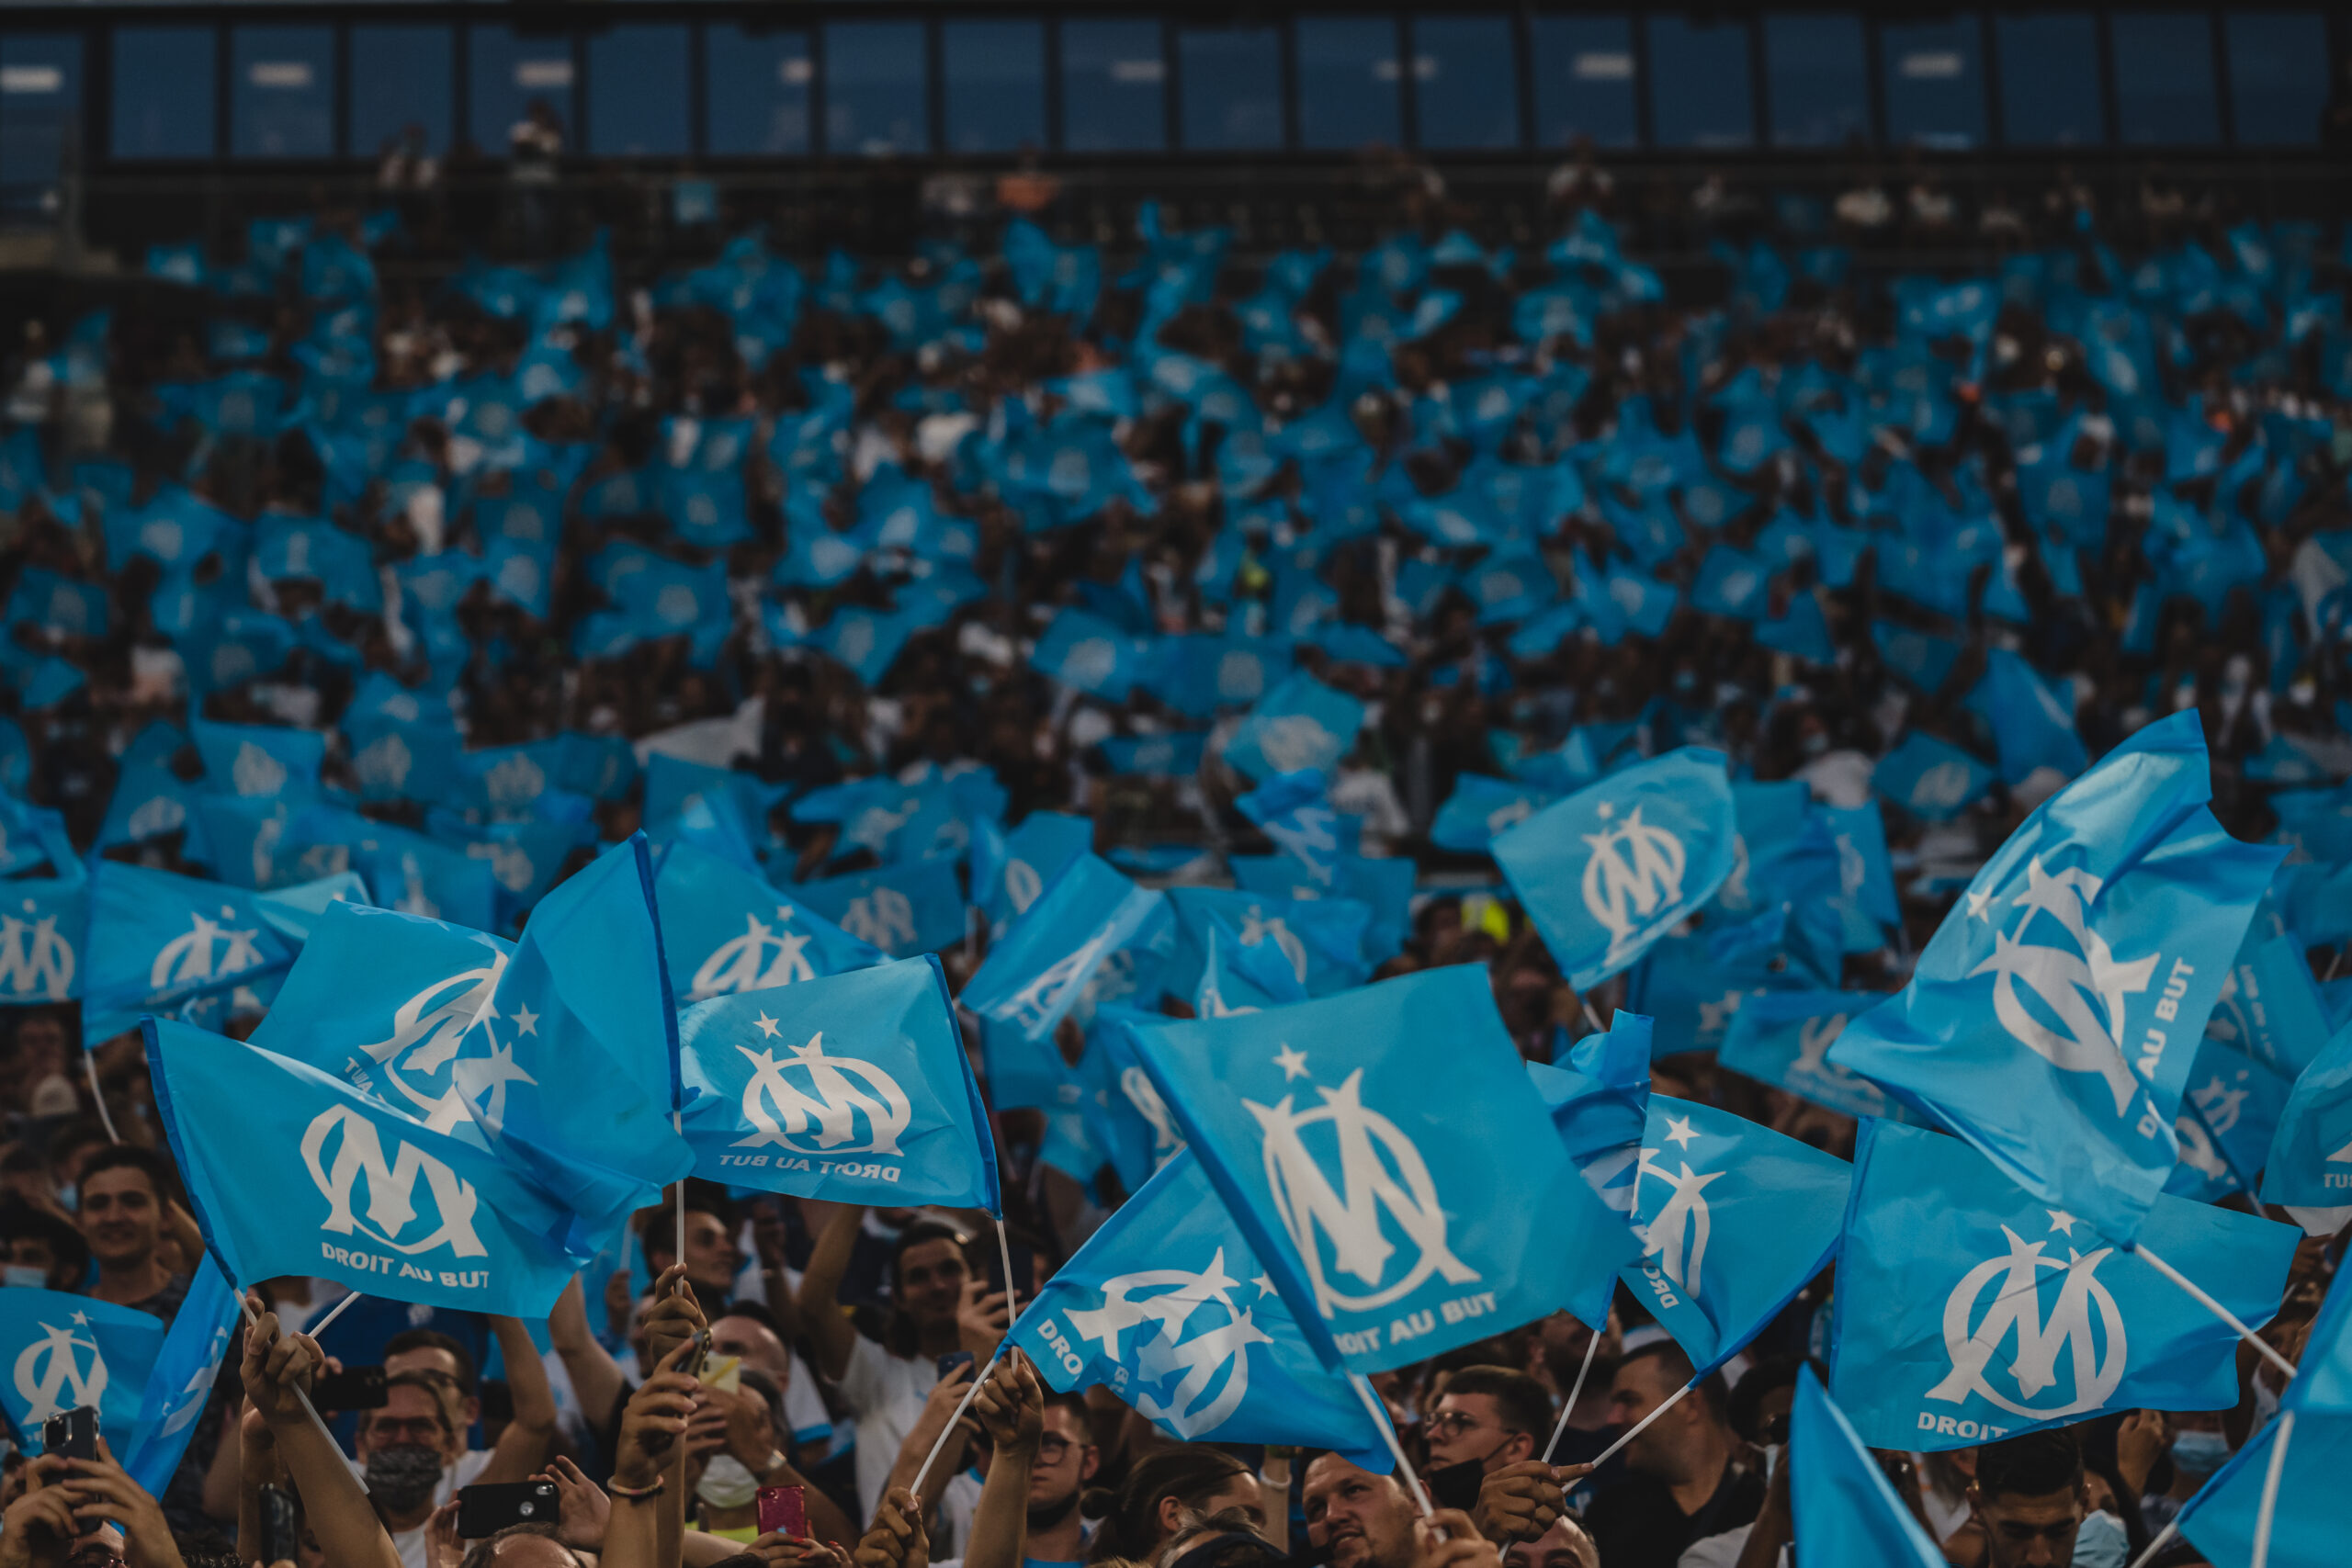 Fans in the stands waiving Olympique de Marseille flags